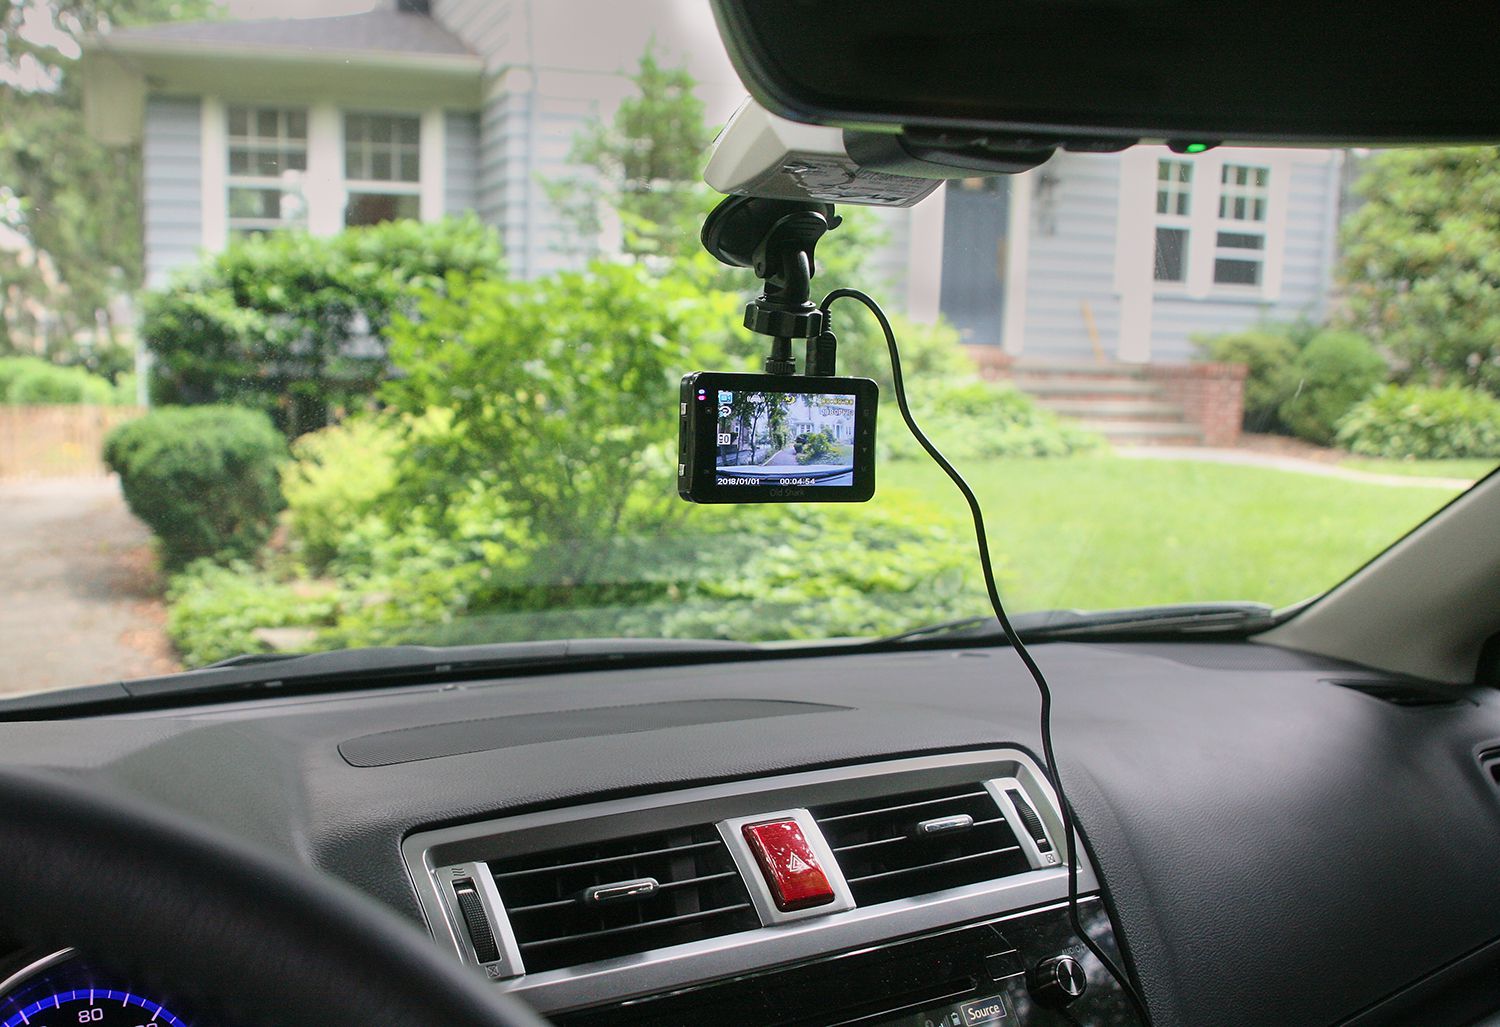  Buying Dash Cams: Important Things To Know   